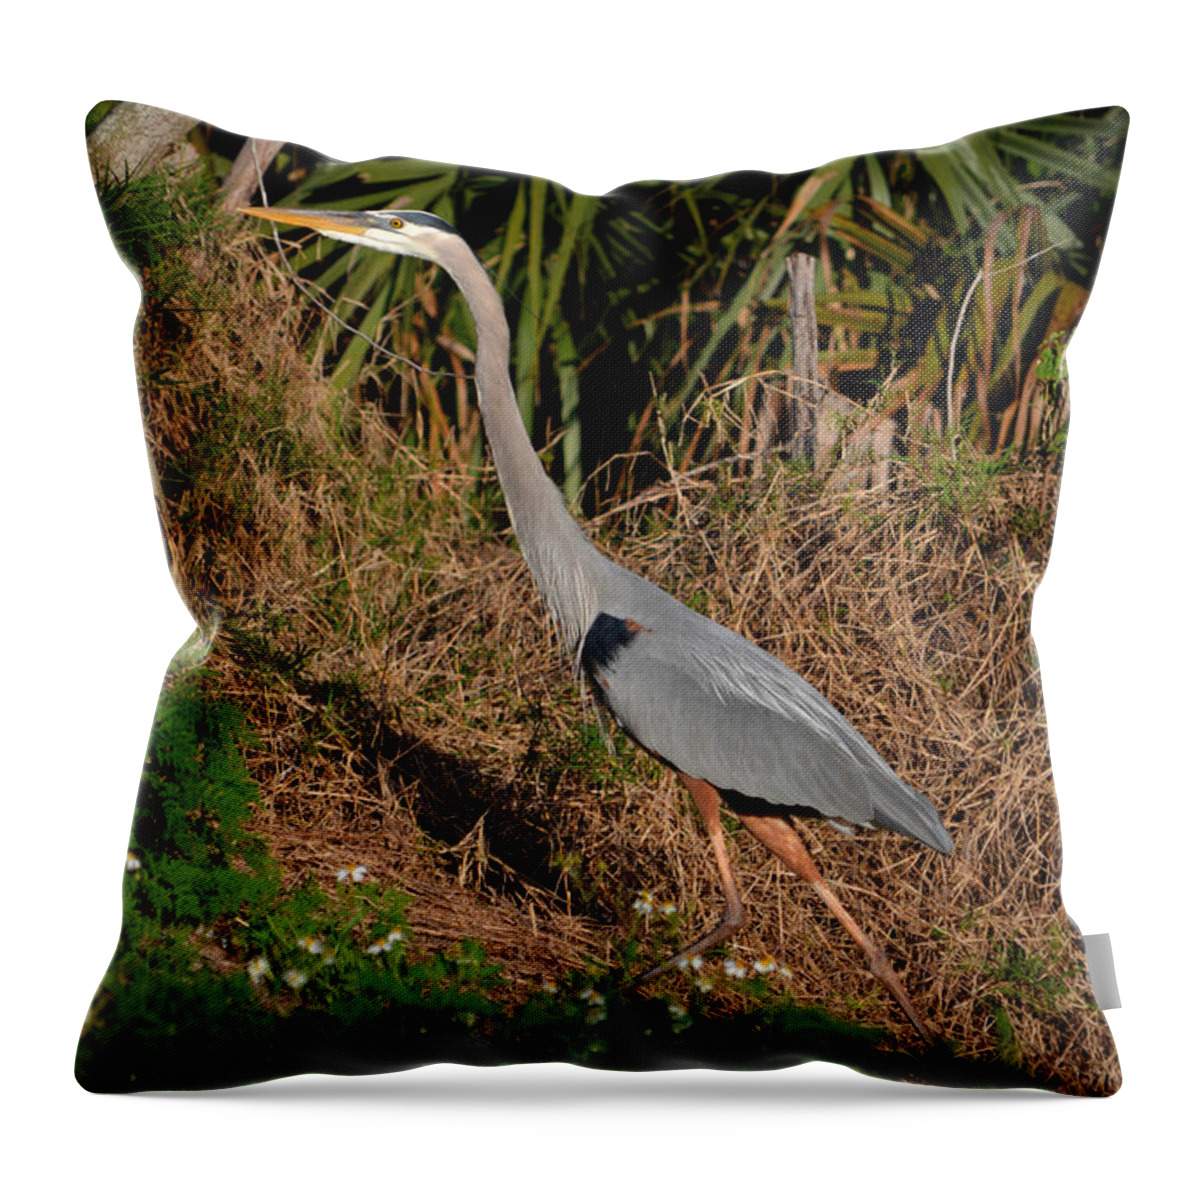  Throw Pillow featuring the photograph 11- Great Blue Heron by Joseph Keane